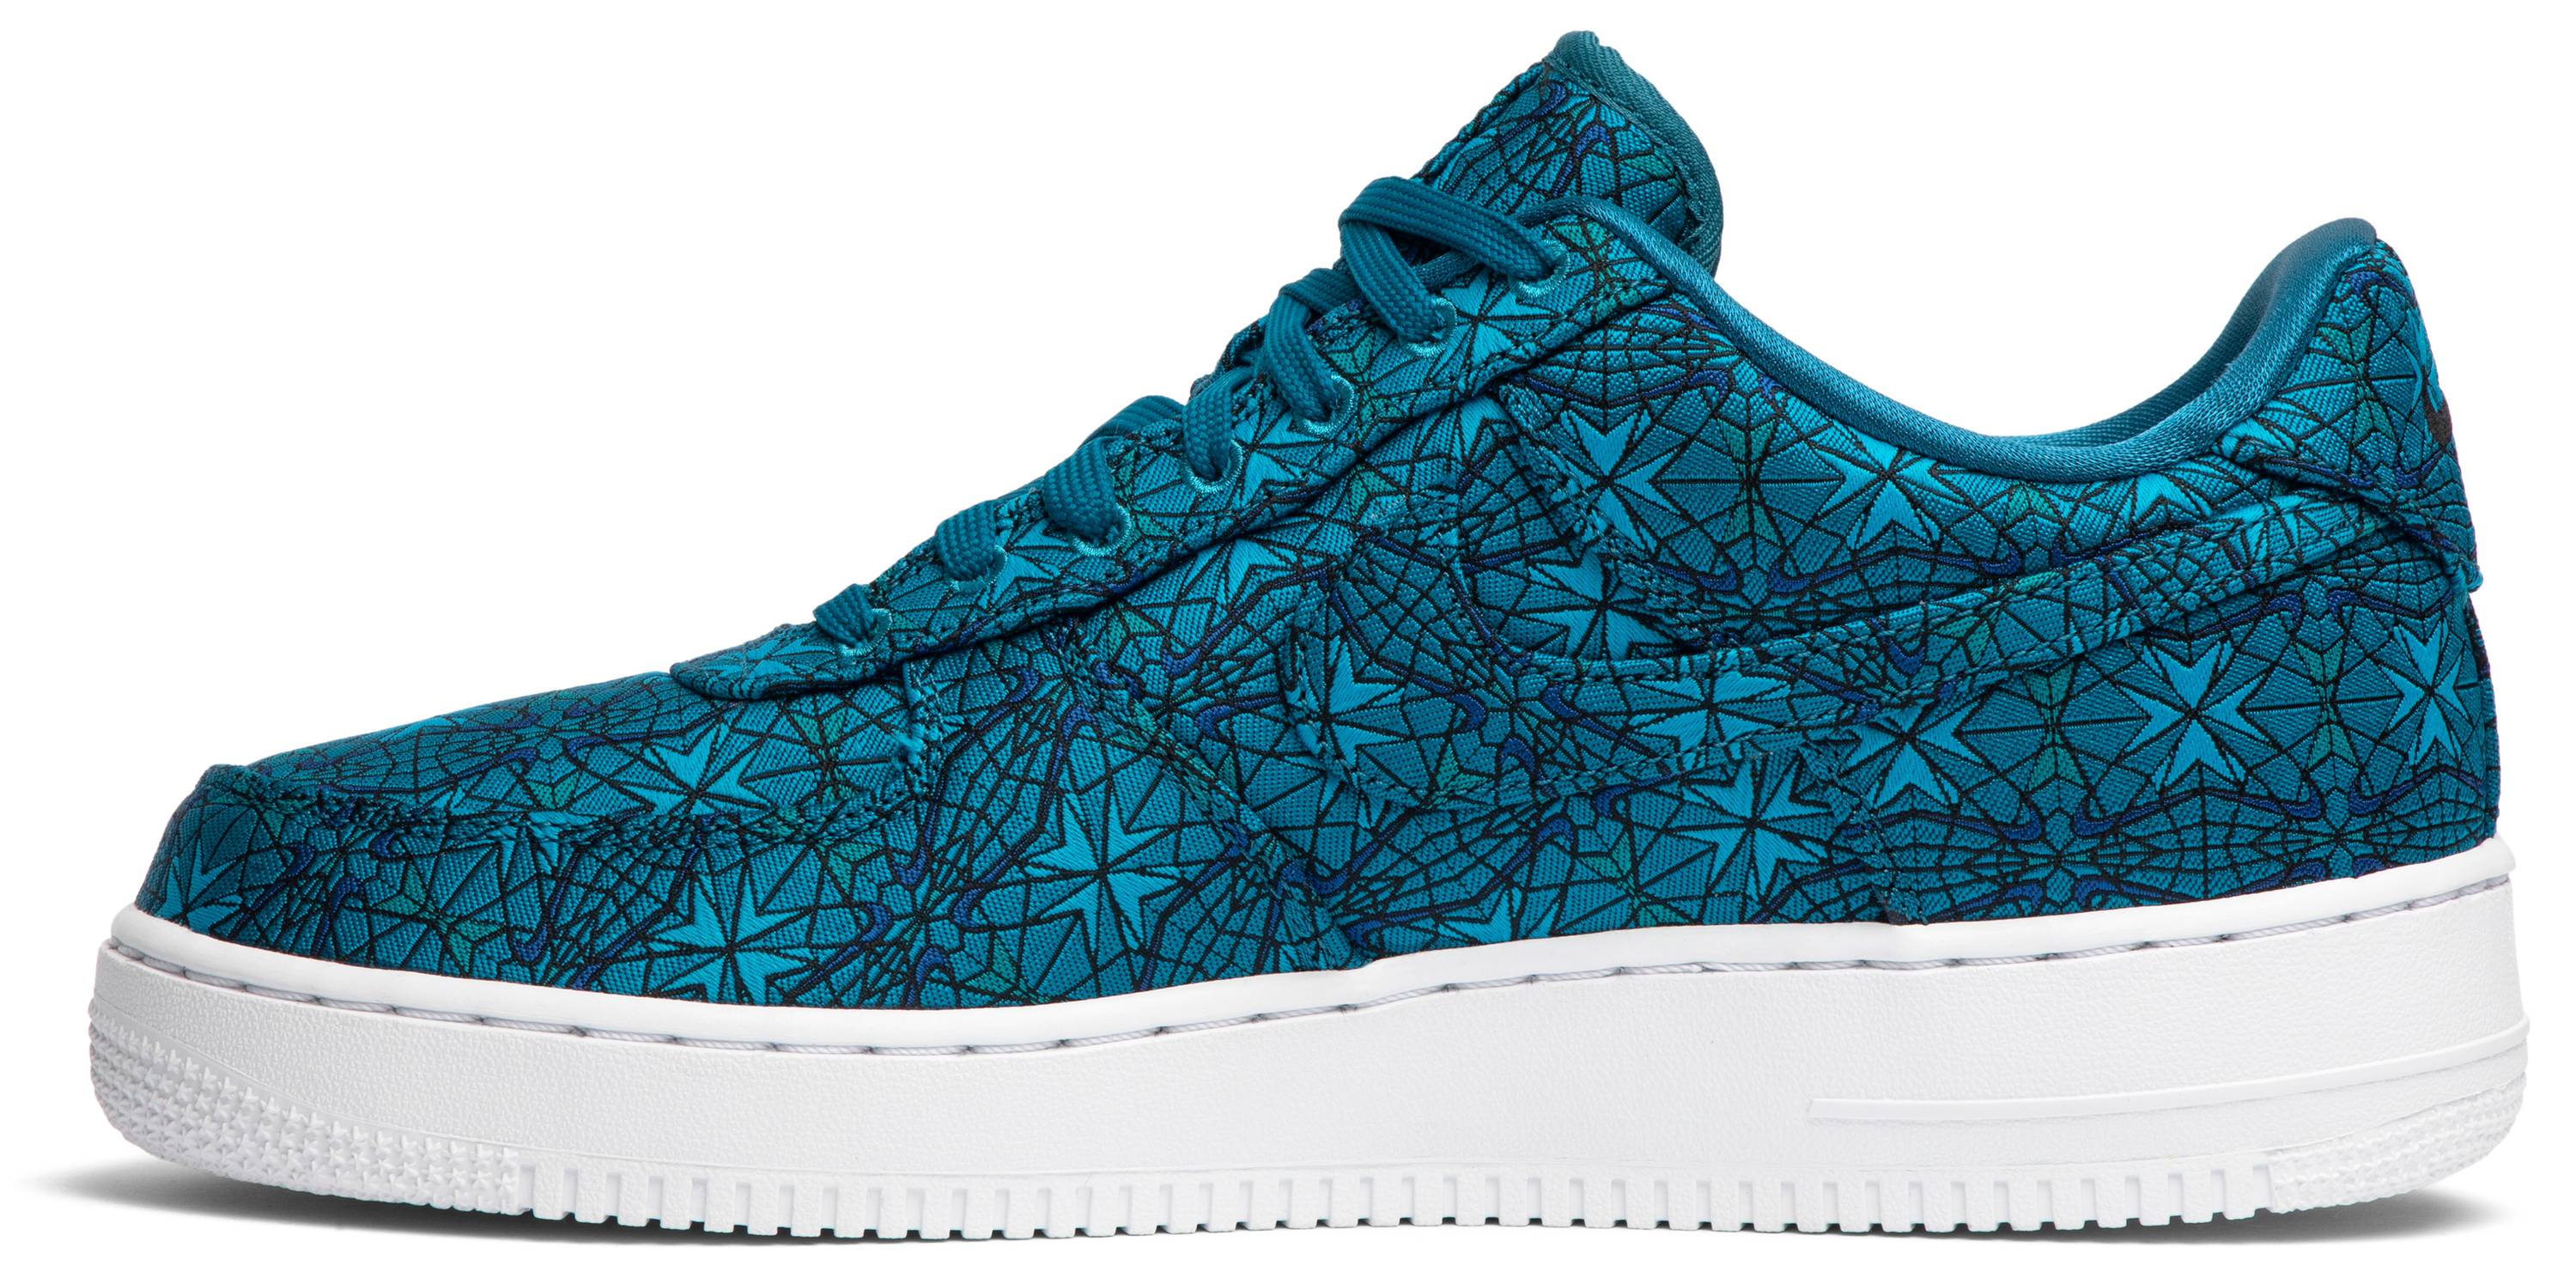 Air Force 1 Low Premium 'Stained Glass' - Nike - AT4144 300 | GOAT